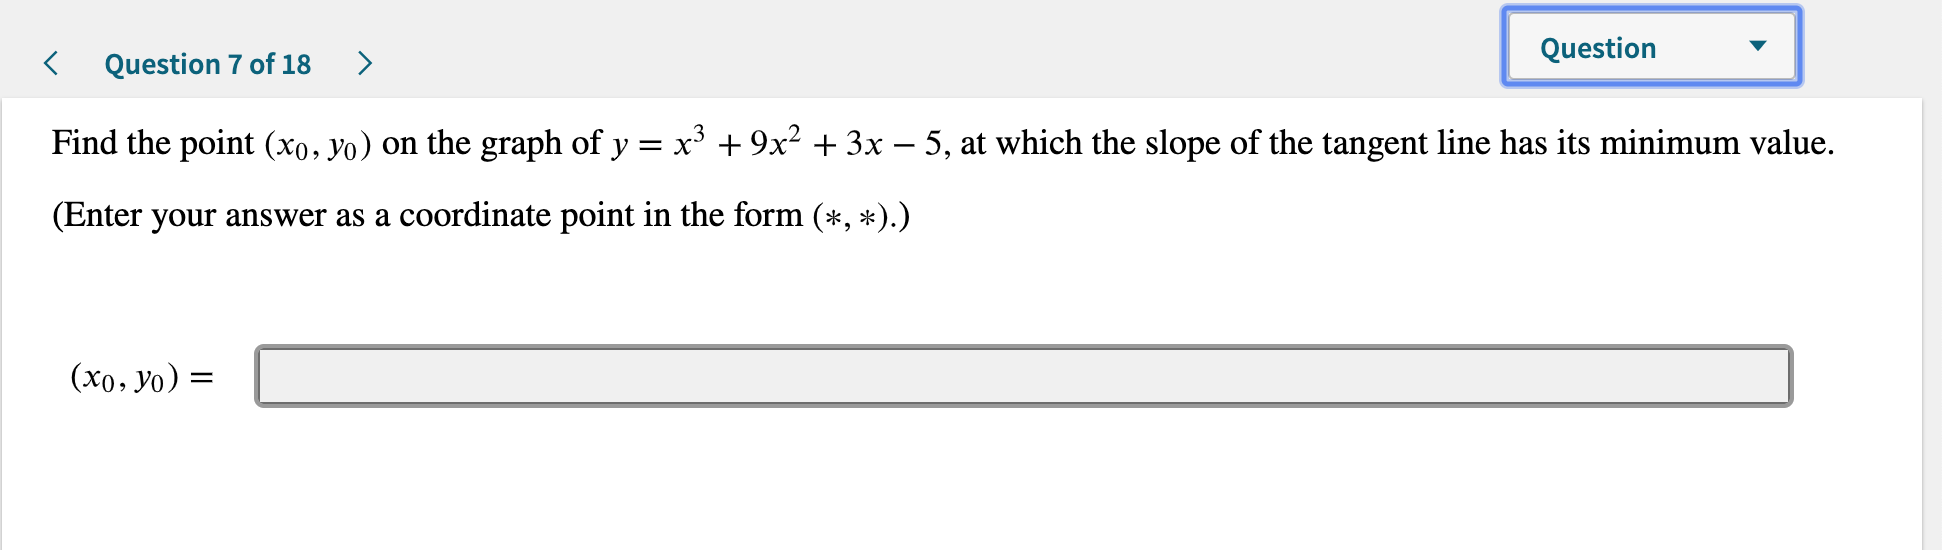 Question
Question 7 of 18
Find the point (xo, yo) on the graph of y x3 9x2 3x - 5, at which the slope of the tangent line has its minimum value.
(Enter your answer as a coordinate point in the form (*, *).)
(x0, yo) =
